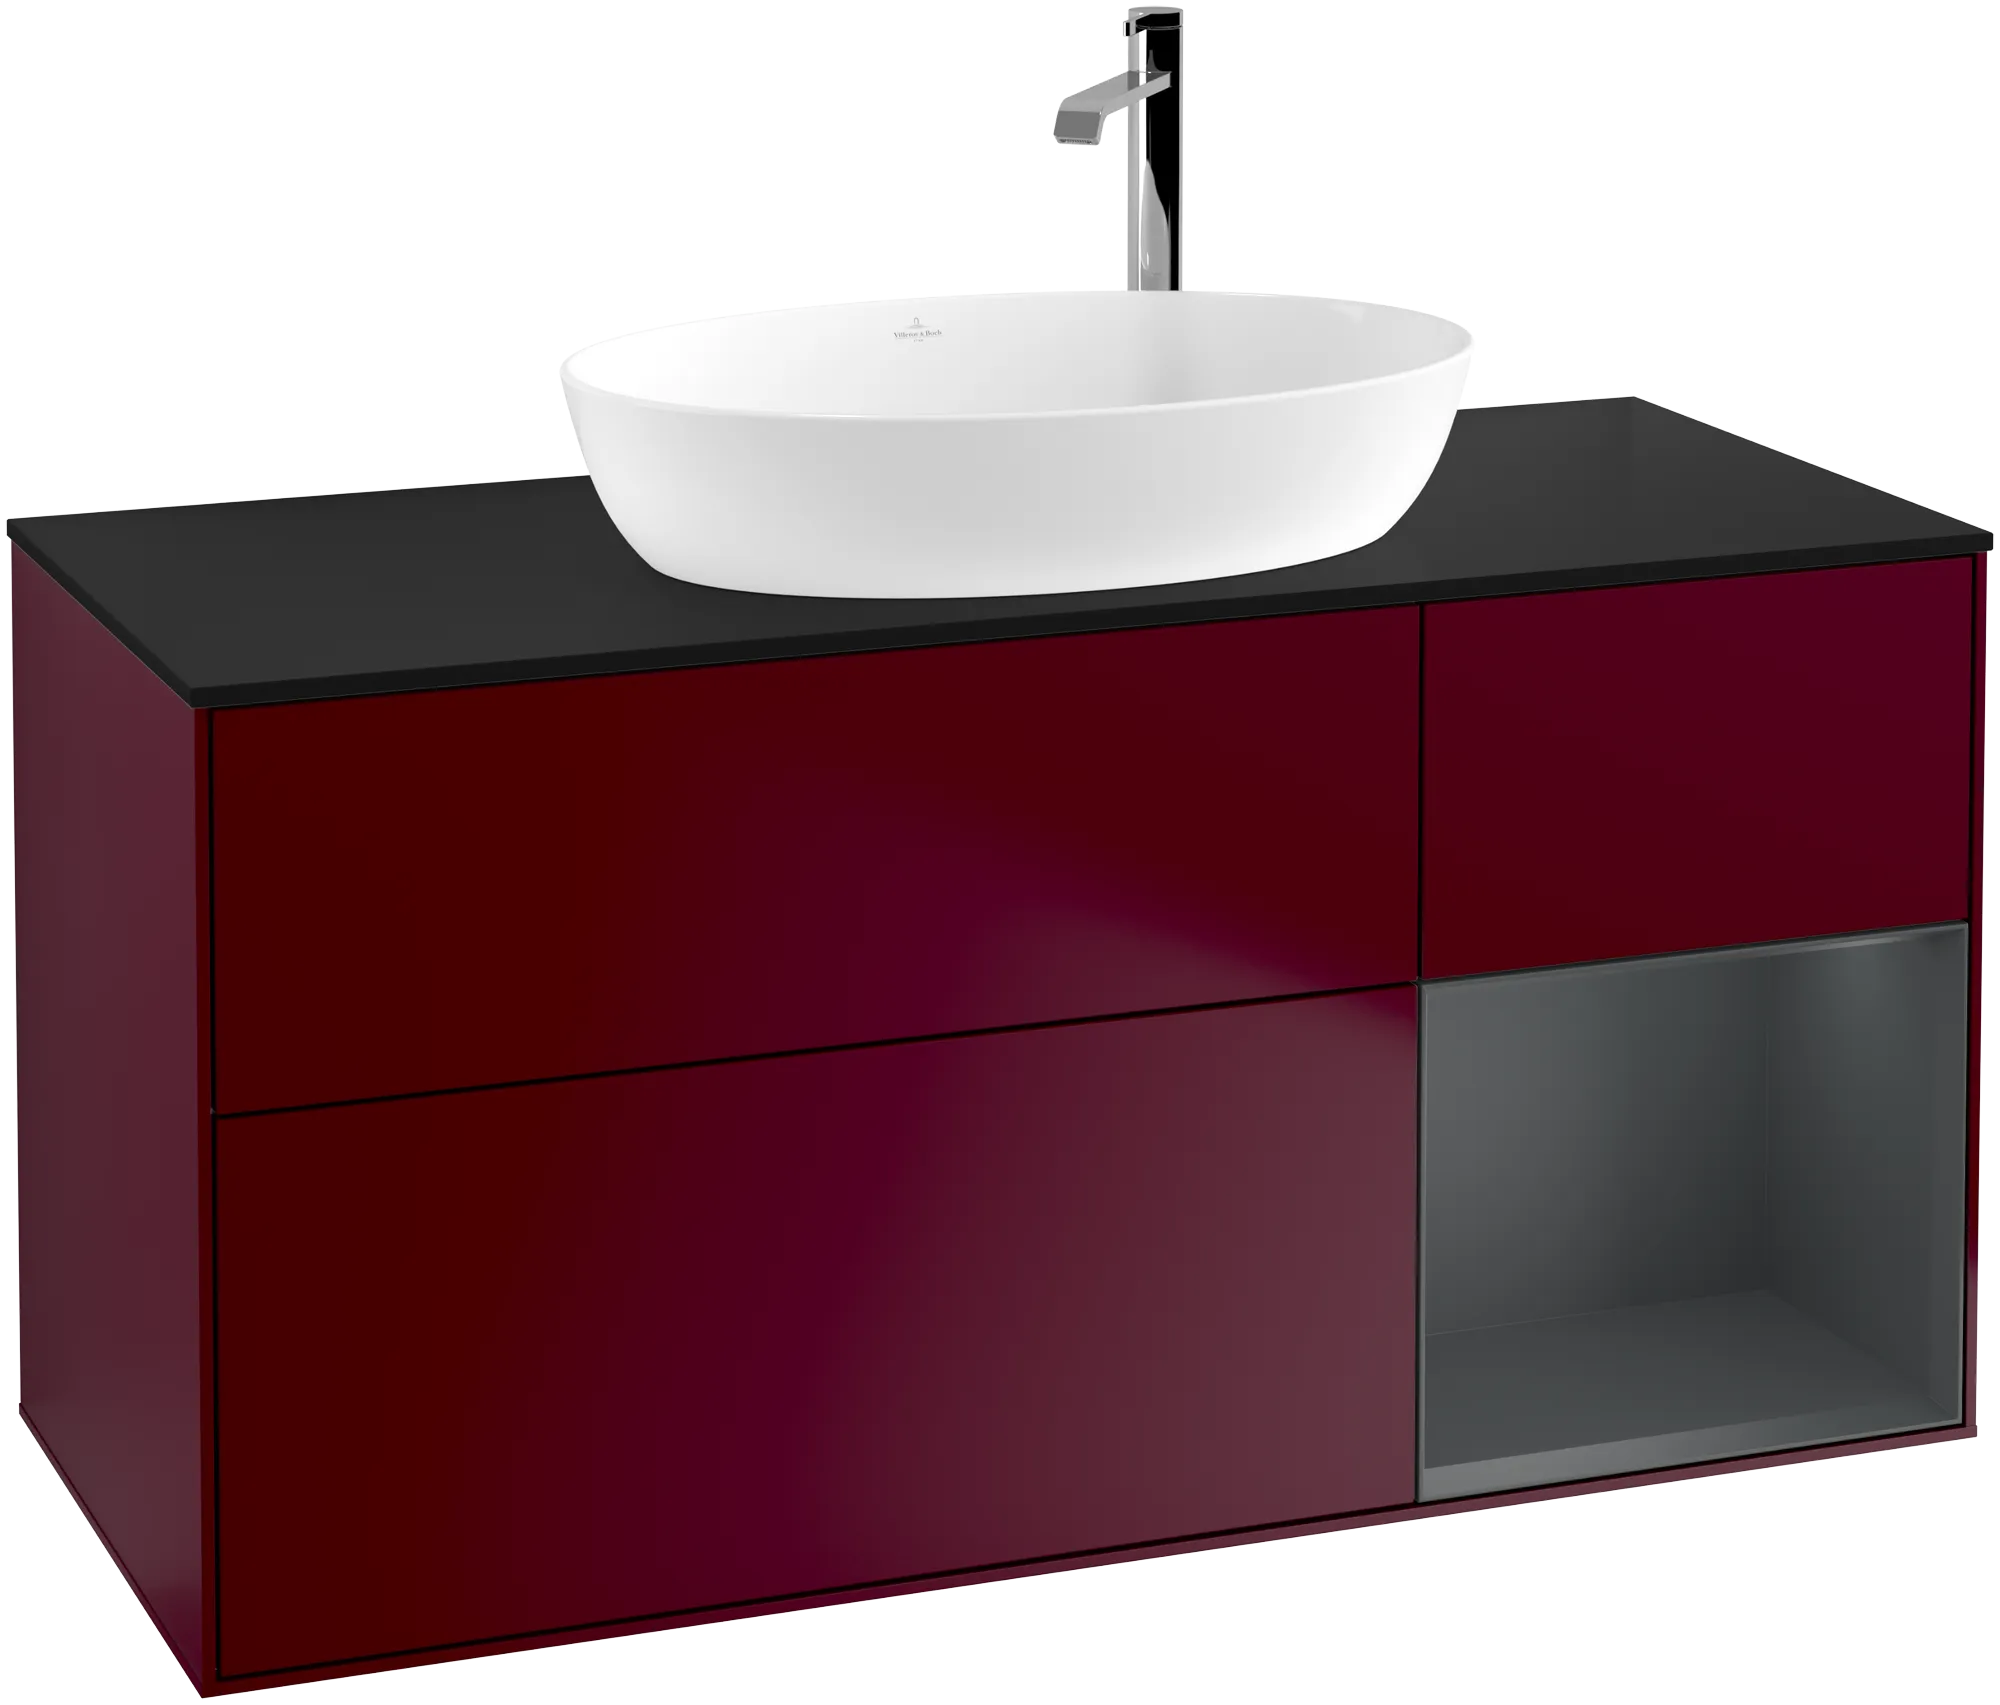 Picture of VILLEROY BOCH Finion Vanity unit, with lighting, 3 pull-out compartments, 1200 x 603 x 501 mm, Peony Matt Lacquer / Midnight Blue Matt Lacquer / Glass Black Matt #G952HGHB